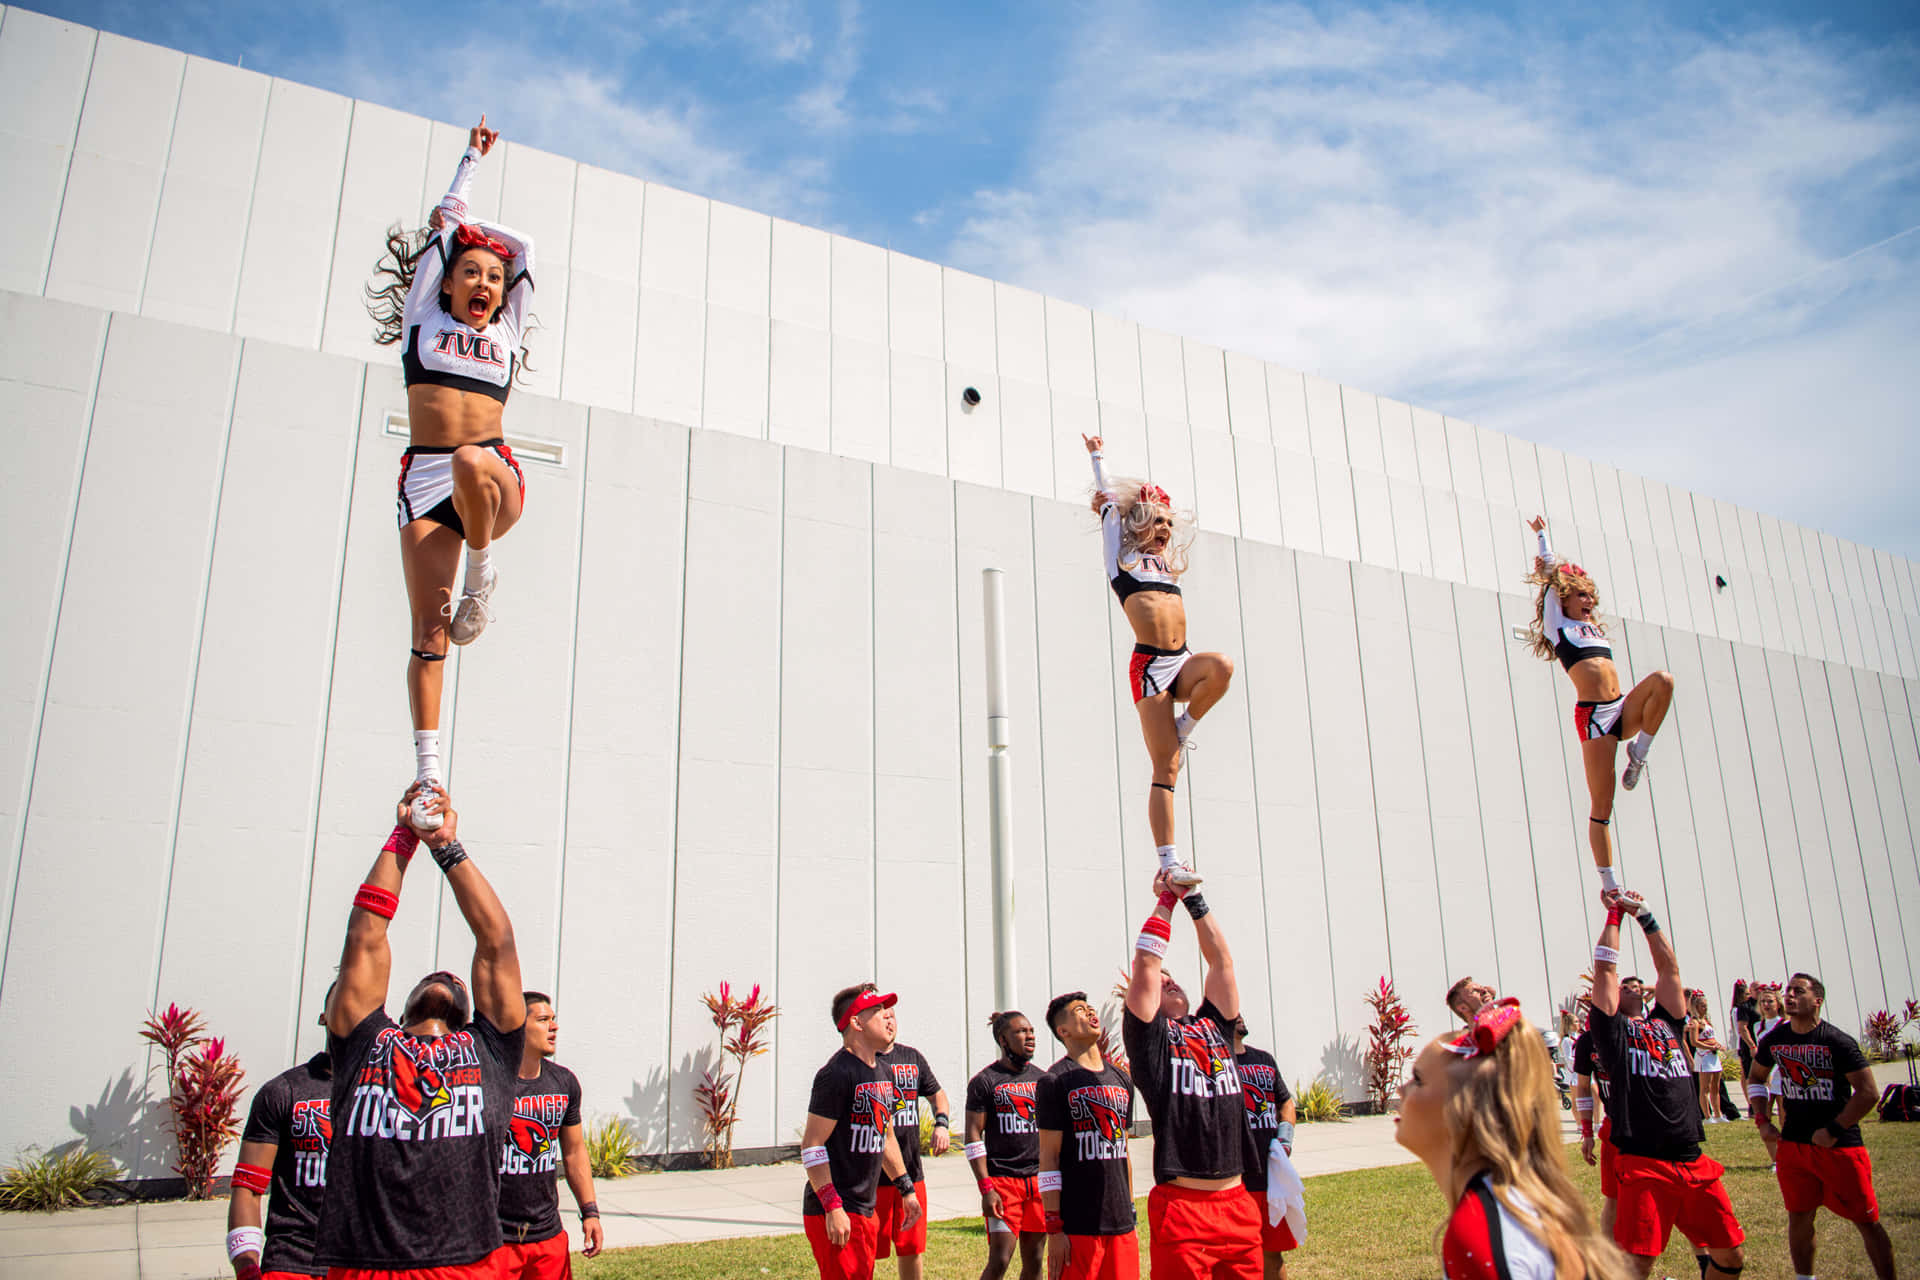 Cheer Team Uniting for a High-Energy Performance